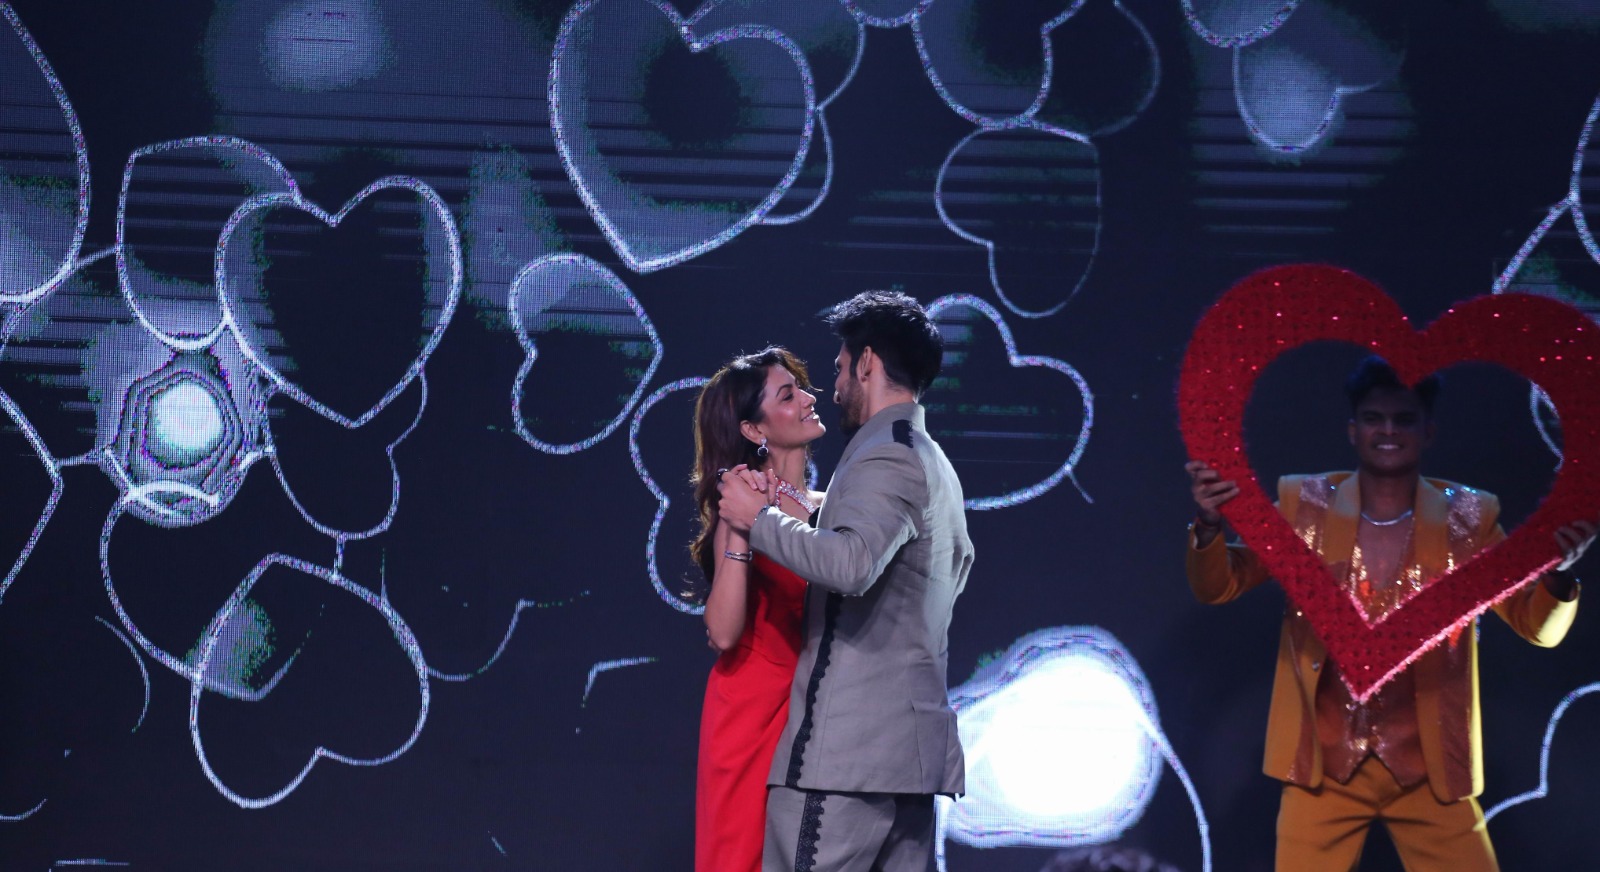 Did you know Arjit Taneja and Sriti Jha met at the Zee Rishtey Awards for the very first time?